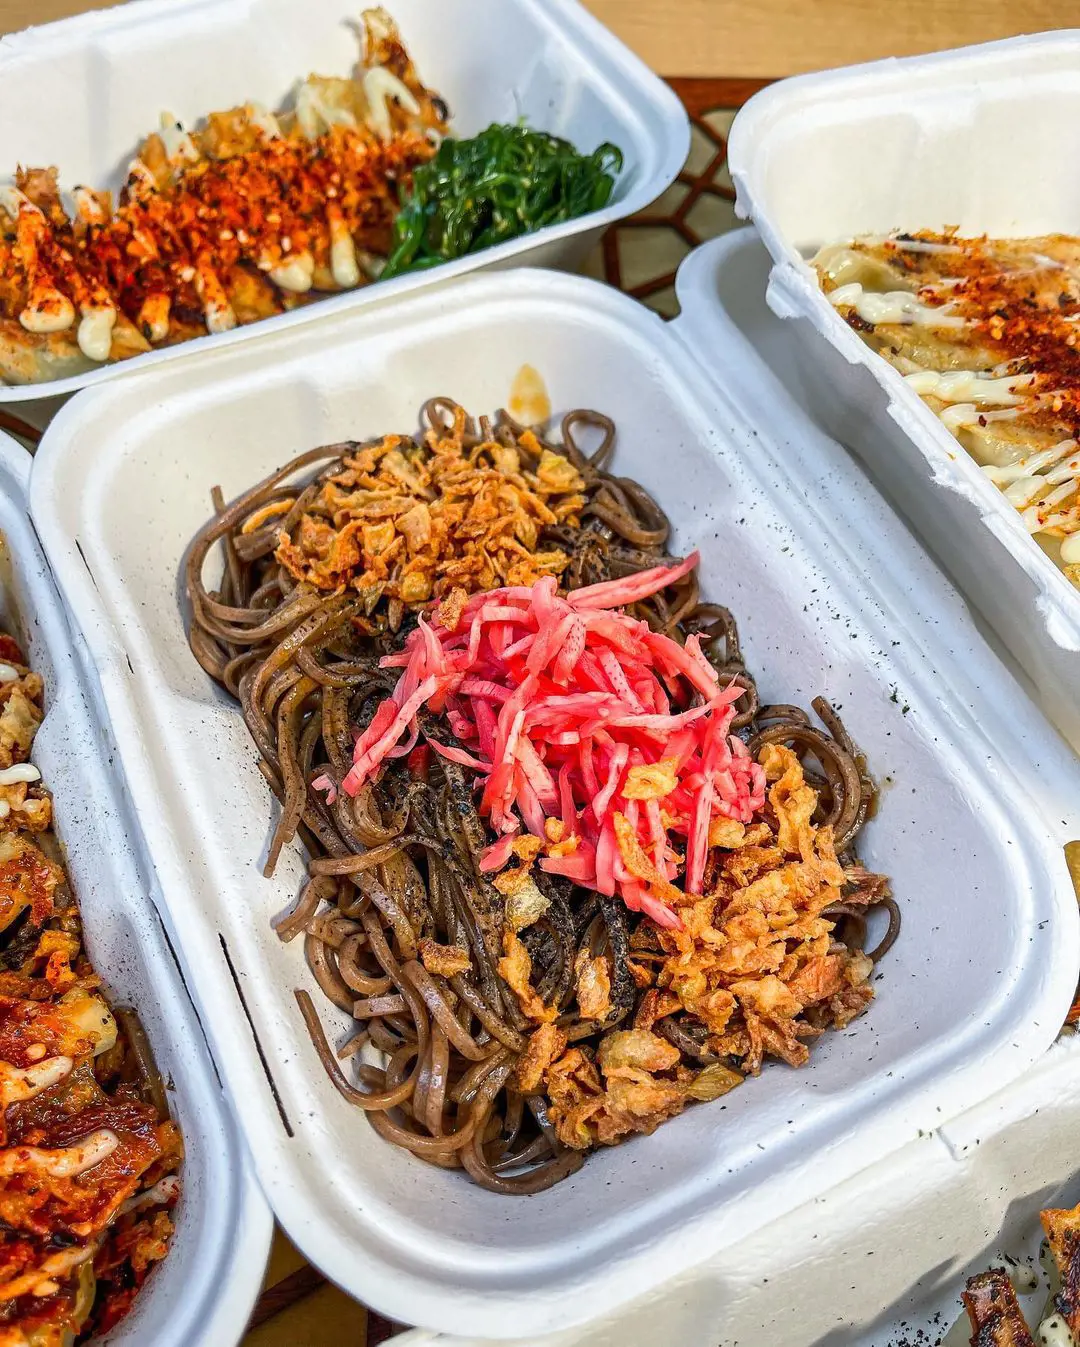 Soba noodles, crispy fried onions, and a helping of pink pickled onions